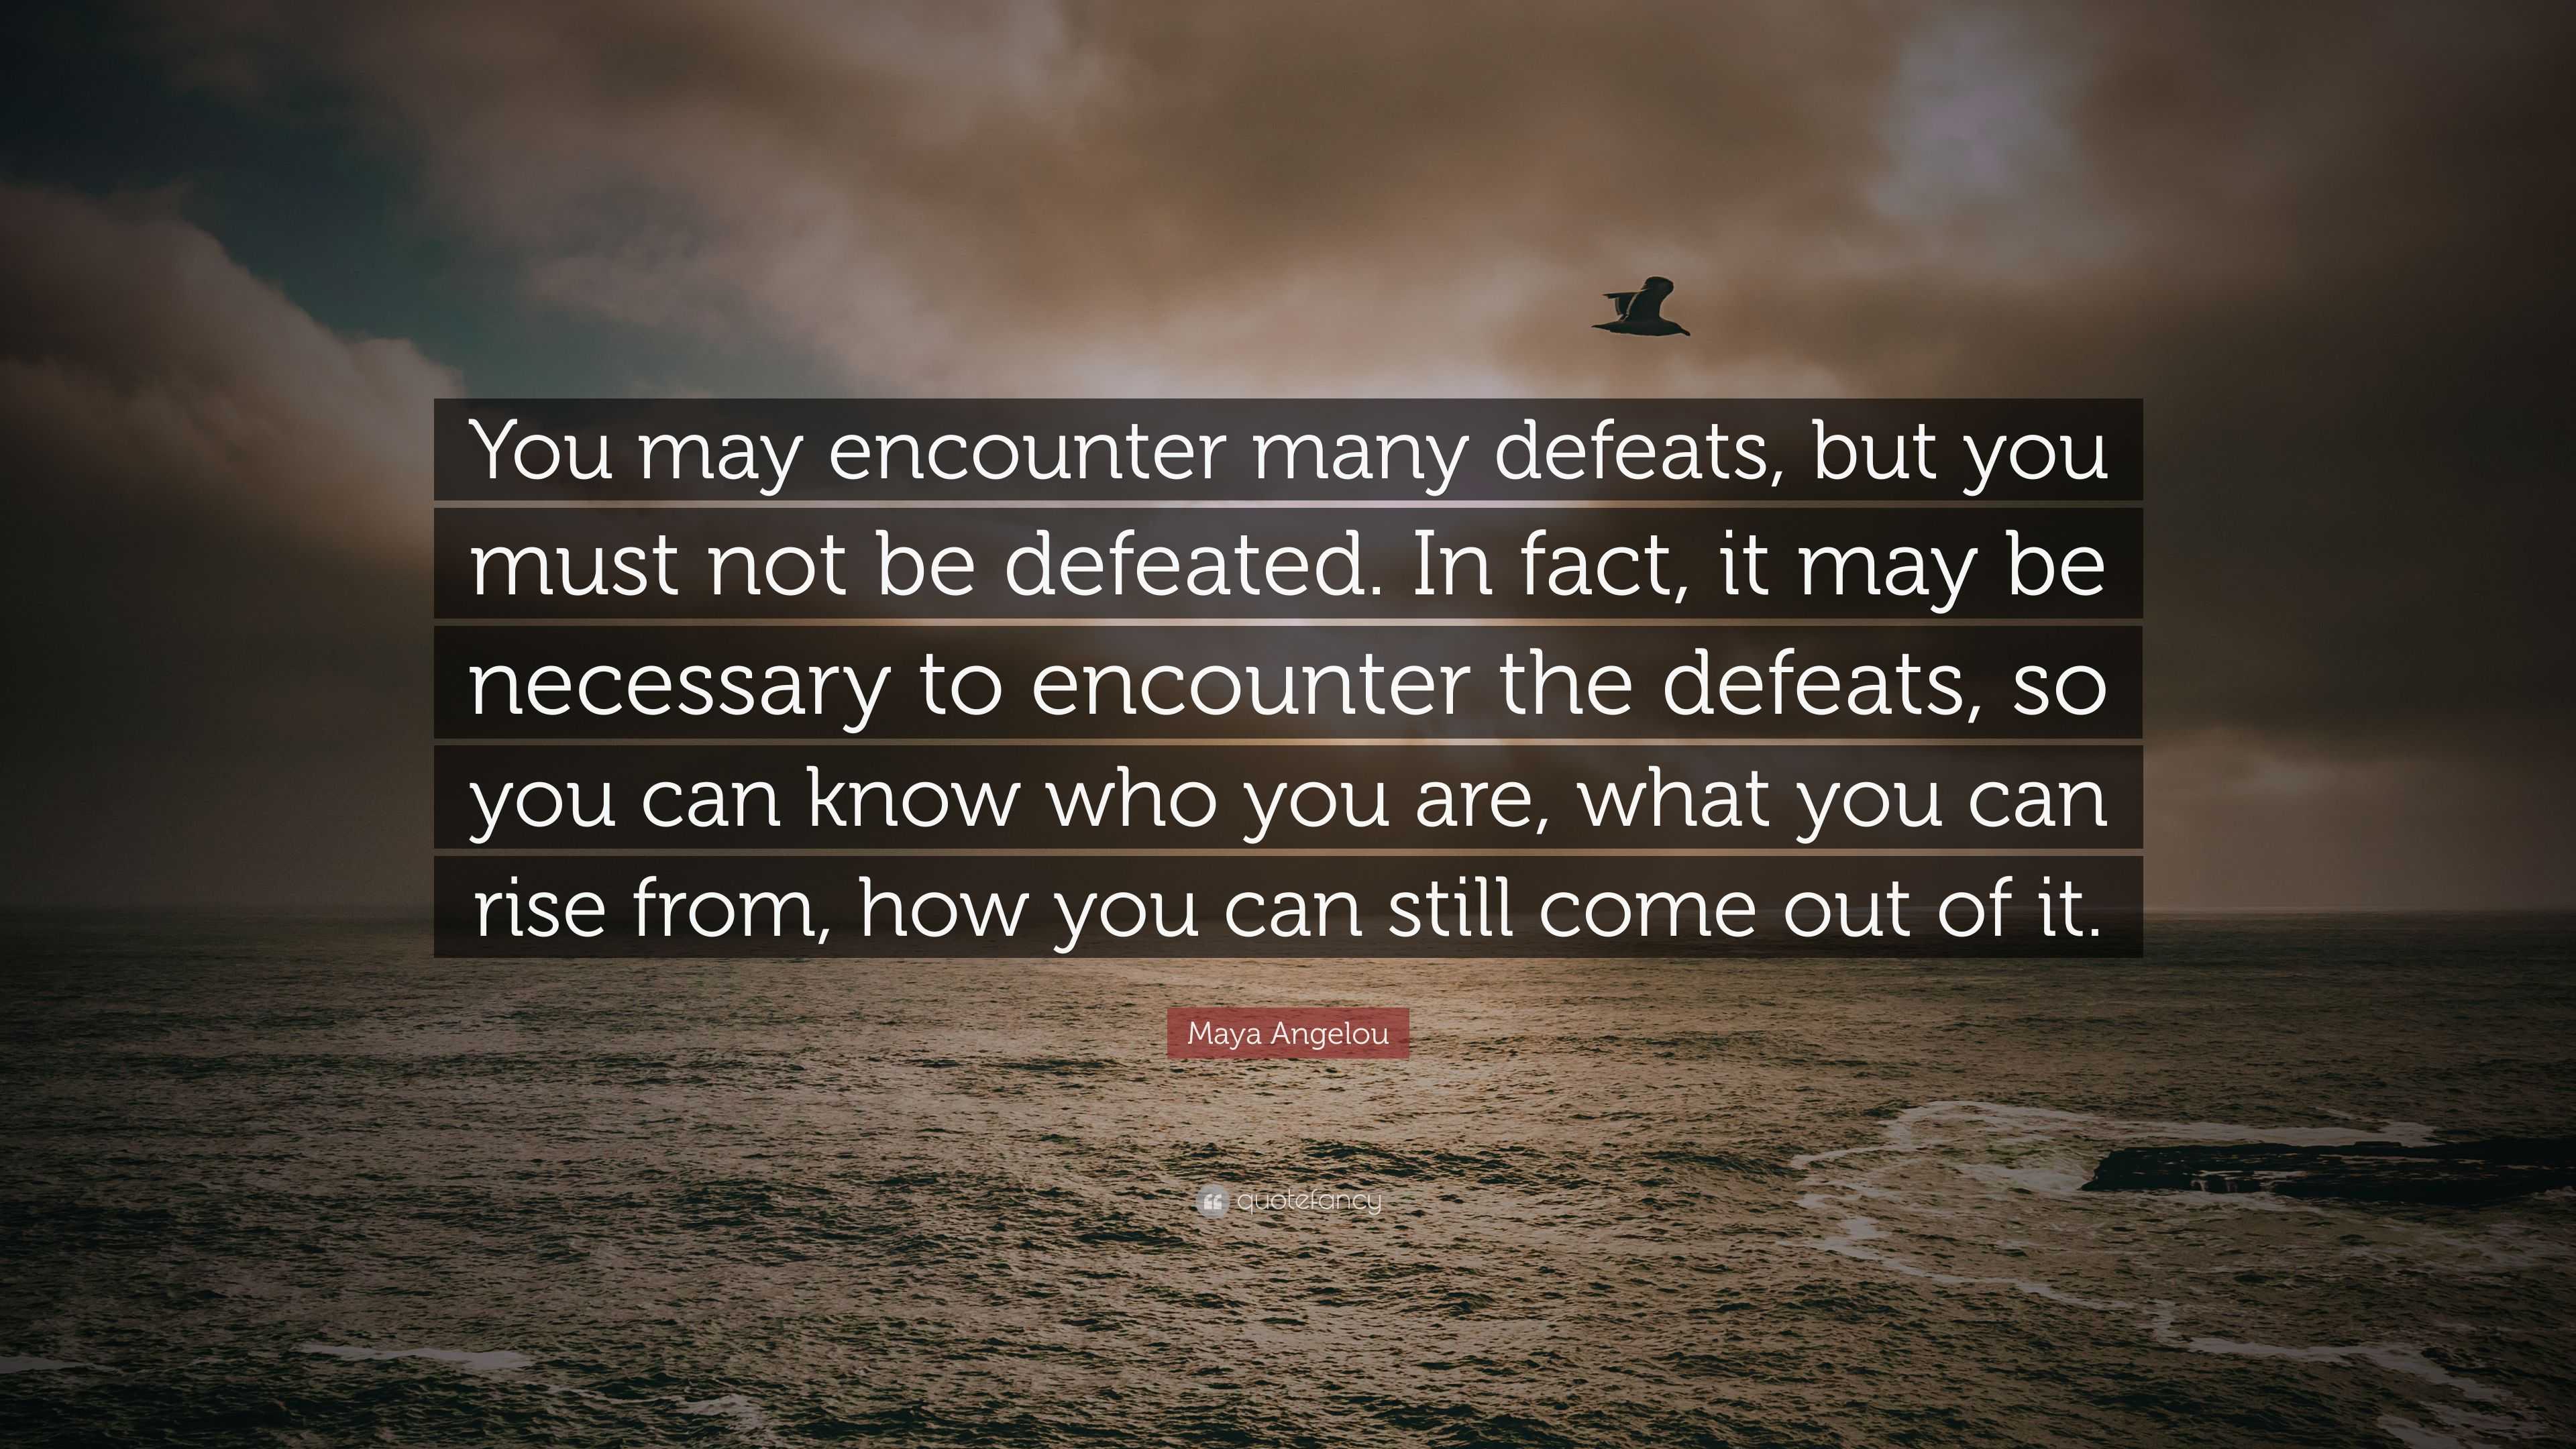 Maya Angelou Quote “You may encounter many defeats but